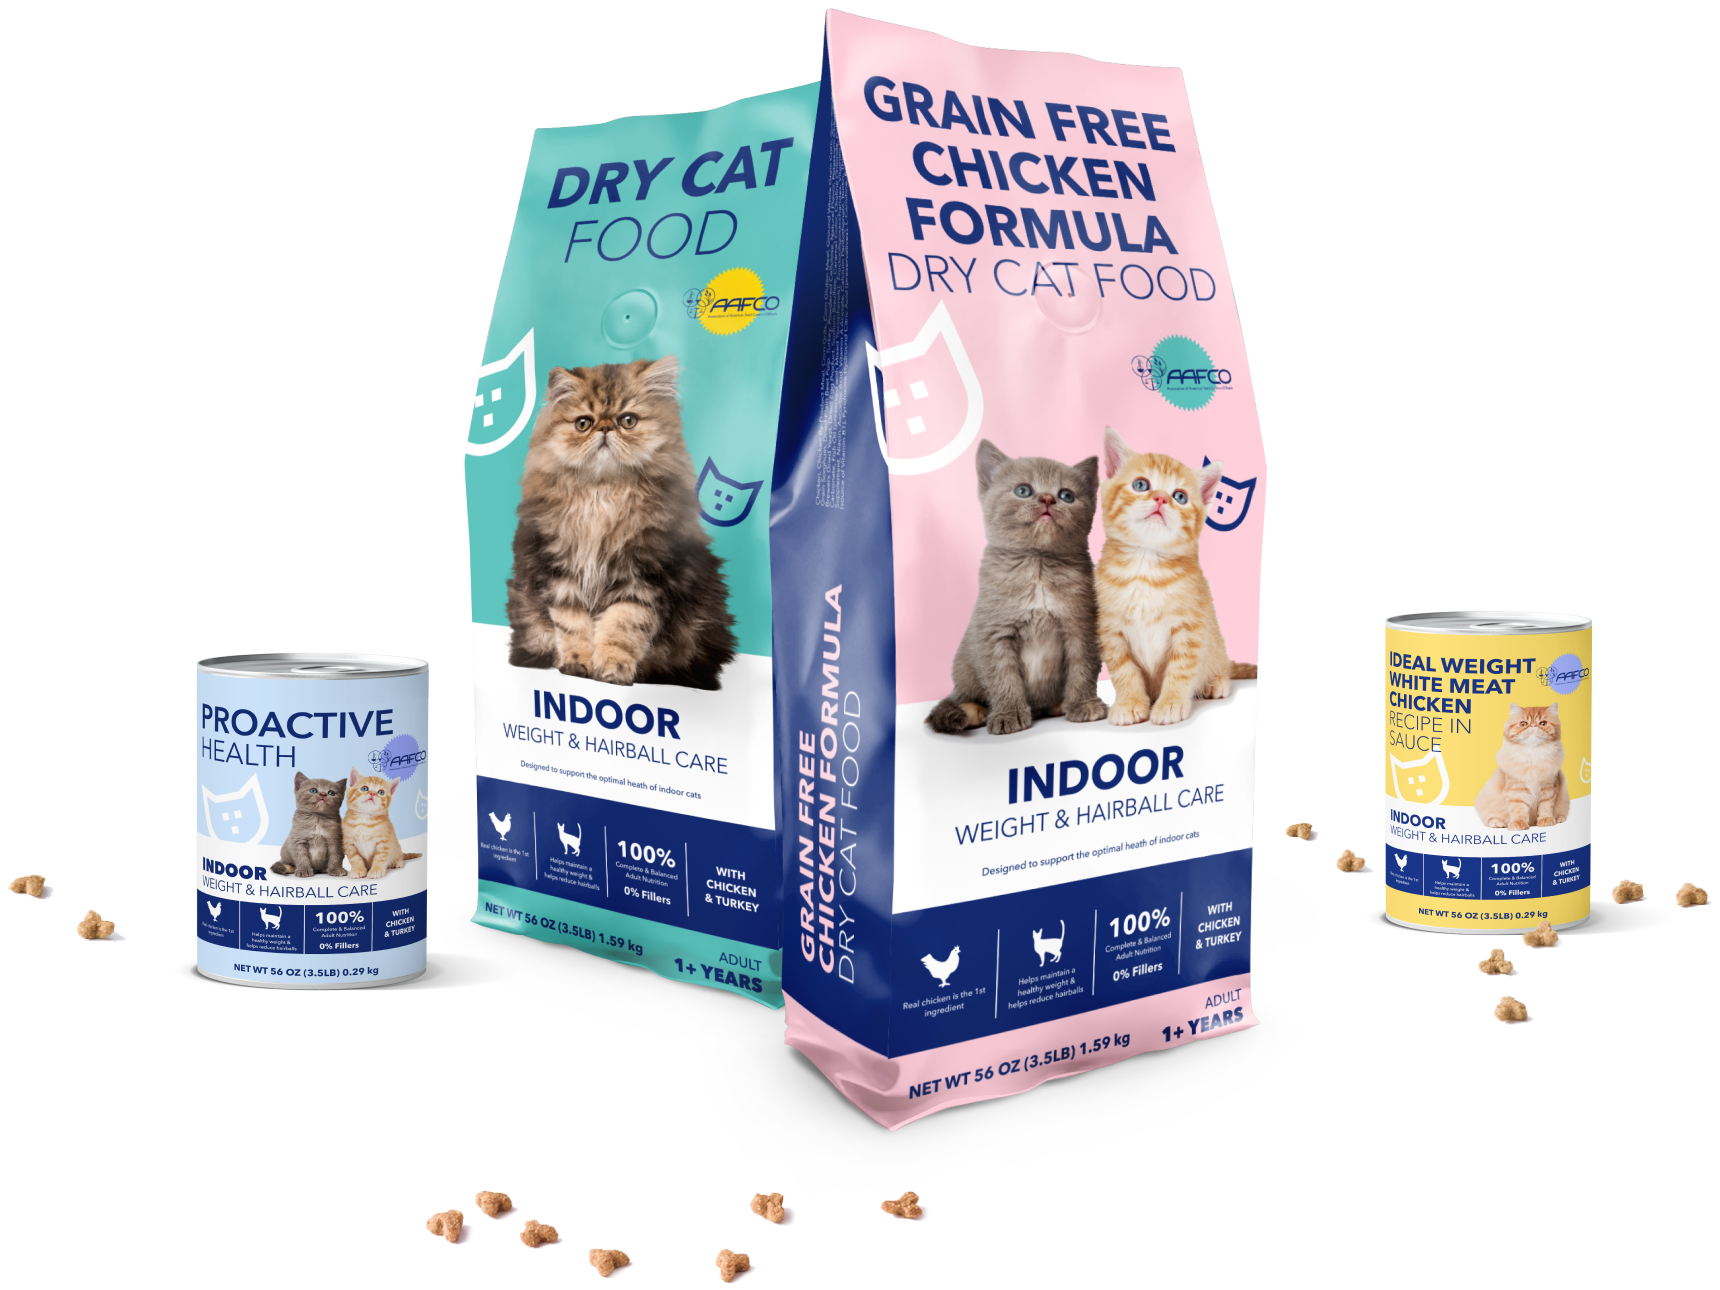 Let's aeed your feline friends with hearty and healthy meals!